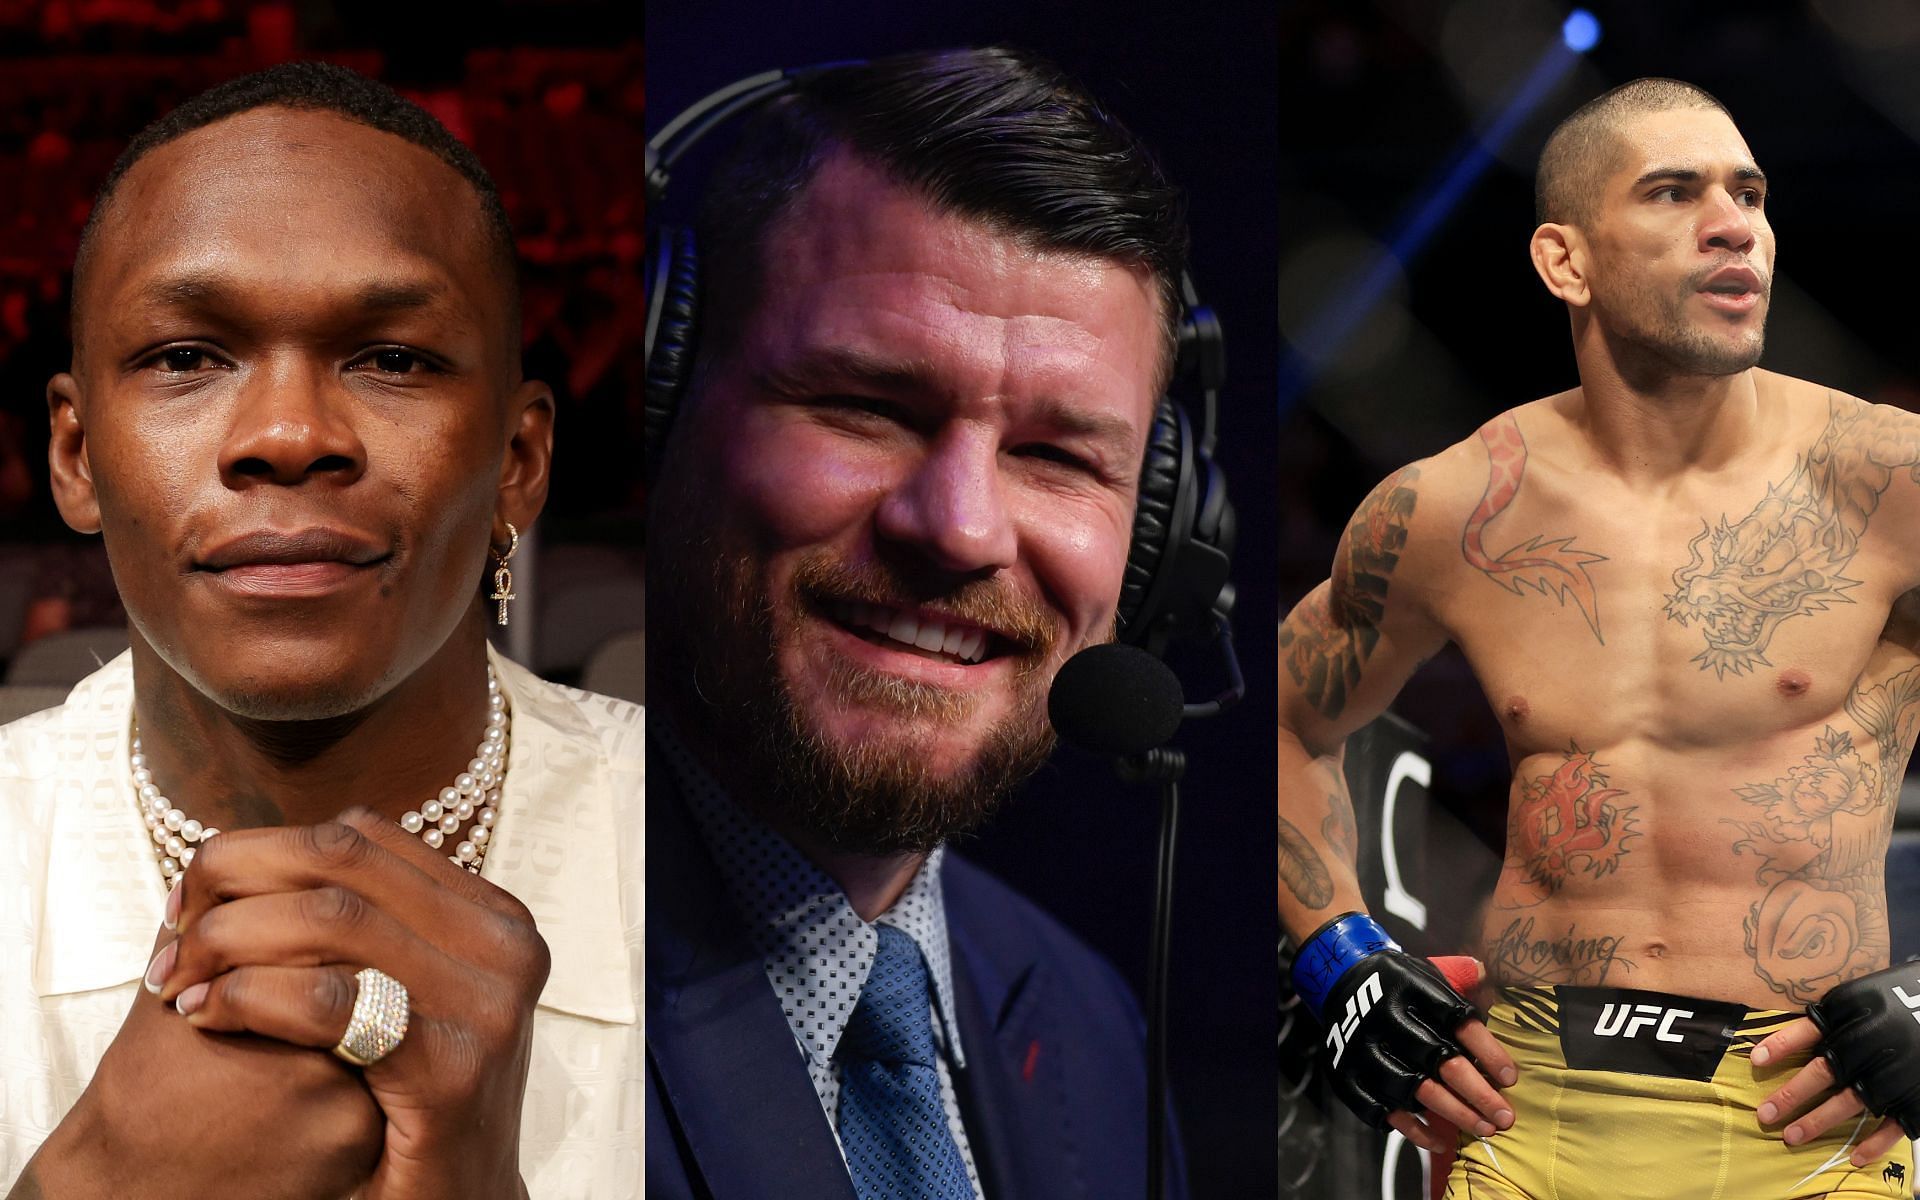 Israel Adesanya (left), Michael Bisping (middle) and Alex Pereira (right) [Image Courtesy: Getty Images]